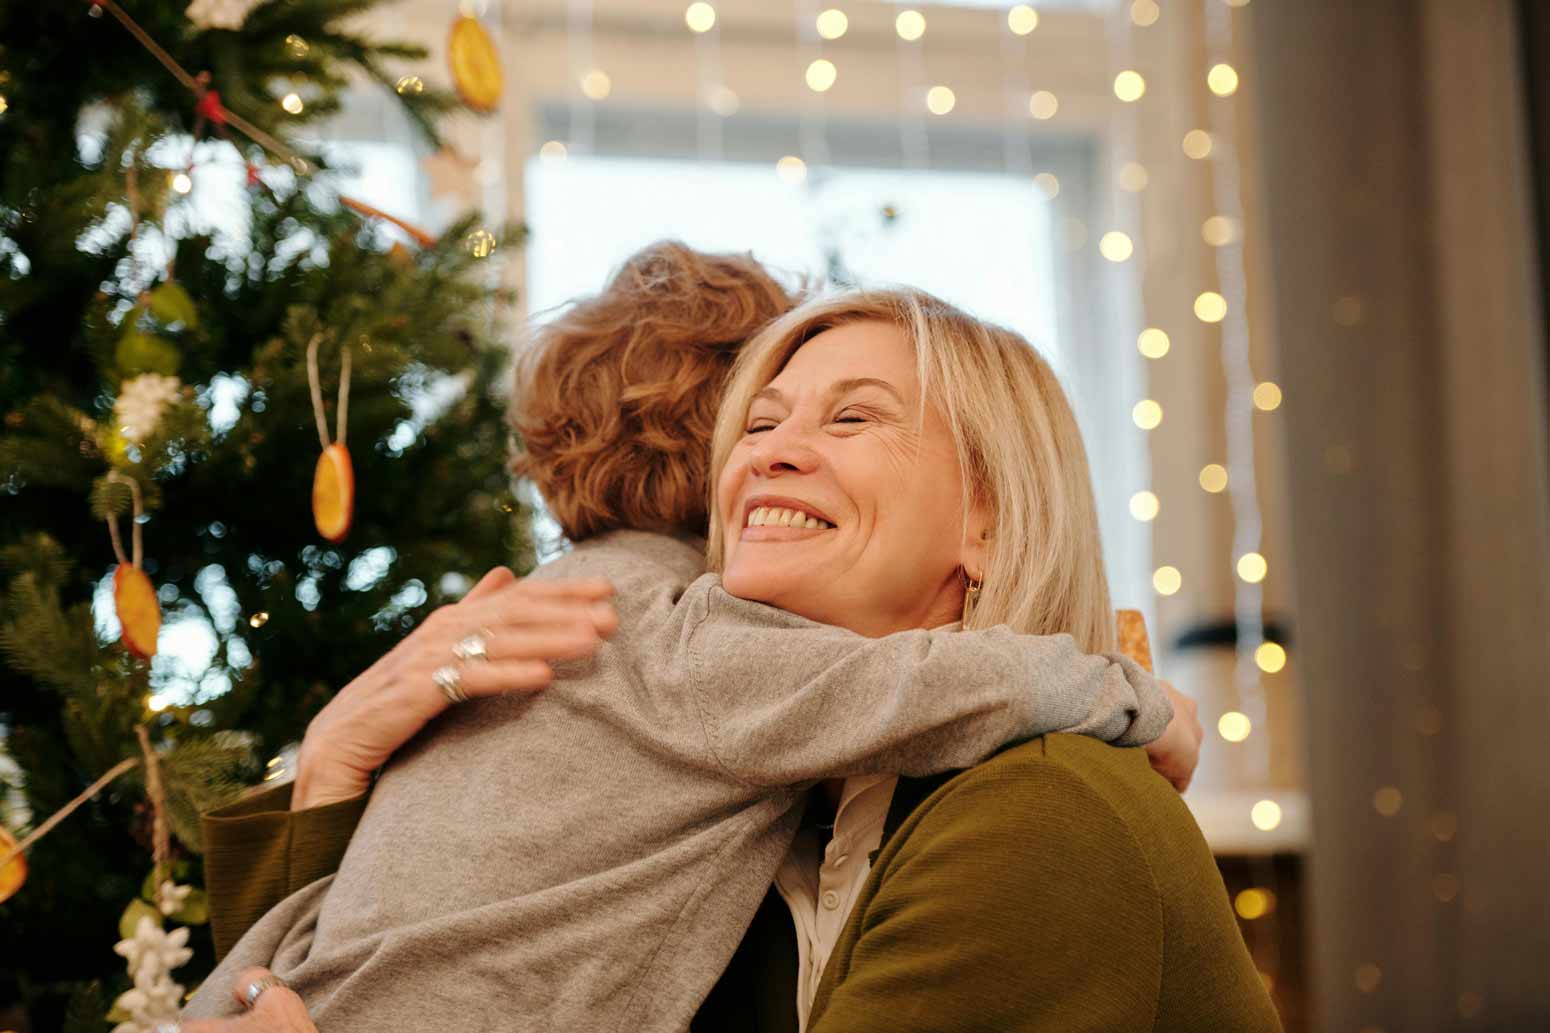 grandma hugging her son in front of a Christmas tree